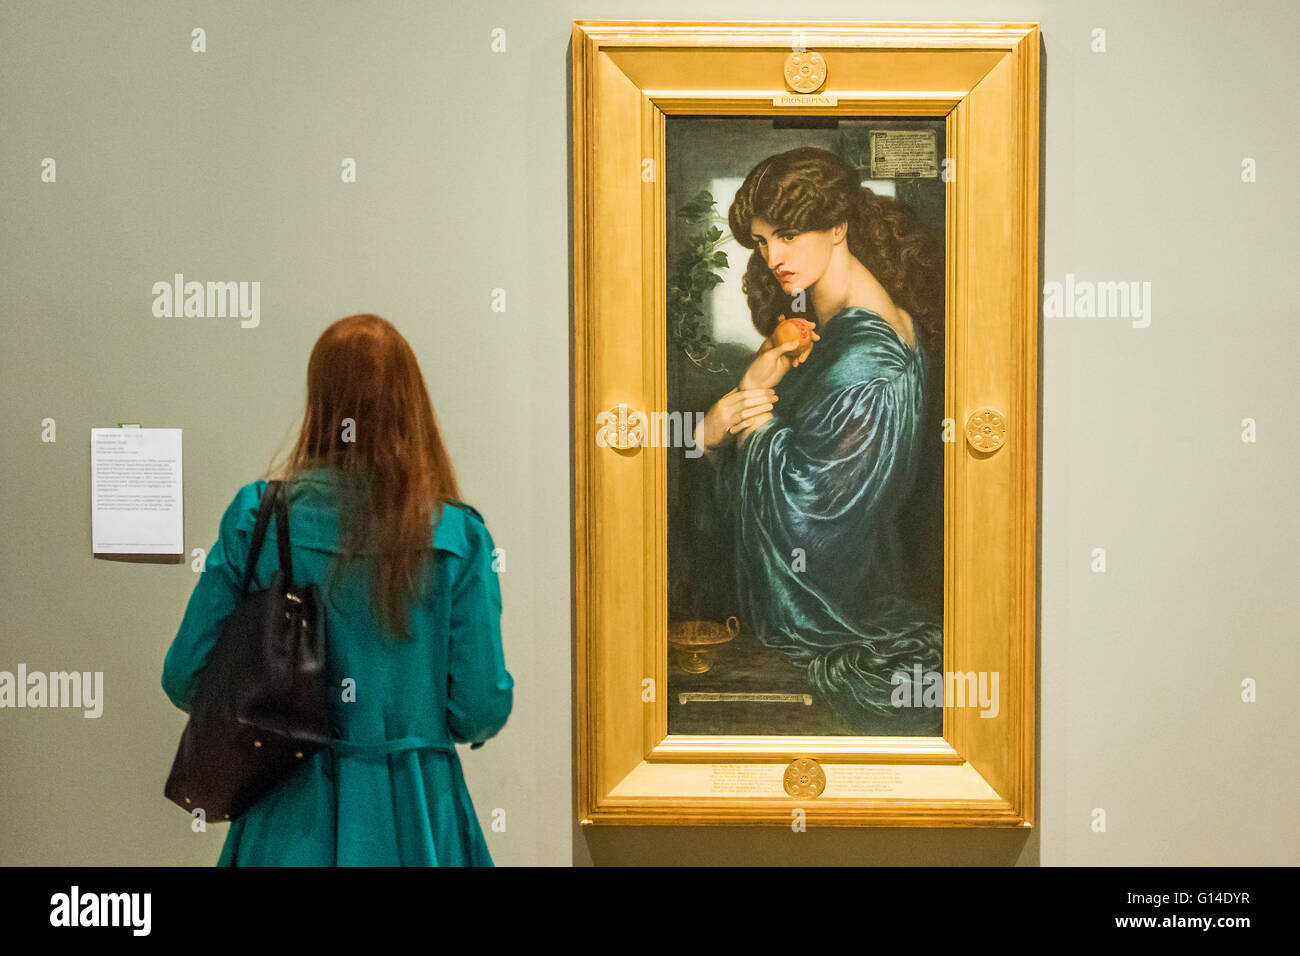 London, UK. 9th May, 2016. Dante Gabriel Rossetti Proserpine 1874 - Painting with Light: Art and Photography from the Pre-Raphaelites to the modern age - Tate Britain presents the first major exhibition to celebrate the spirited conversation between early photography and British art. It brings together photographs and paintings including Pre-Raphaelite, Aesthetic and British impressionist works.  Credit:  Guy Bell/Alamy Live News Stock Photo